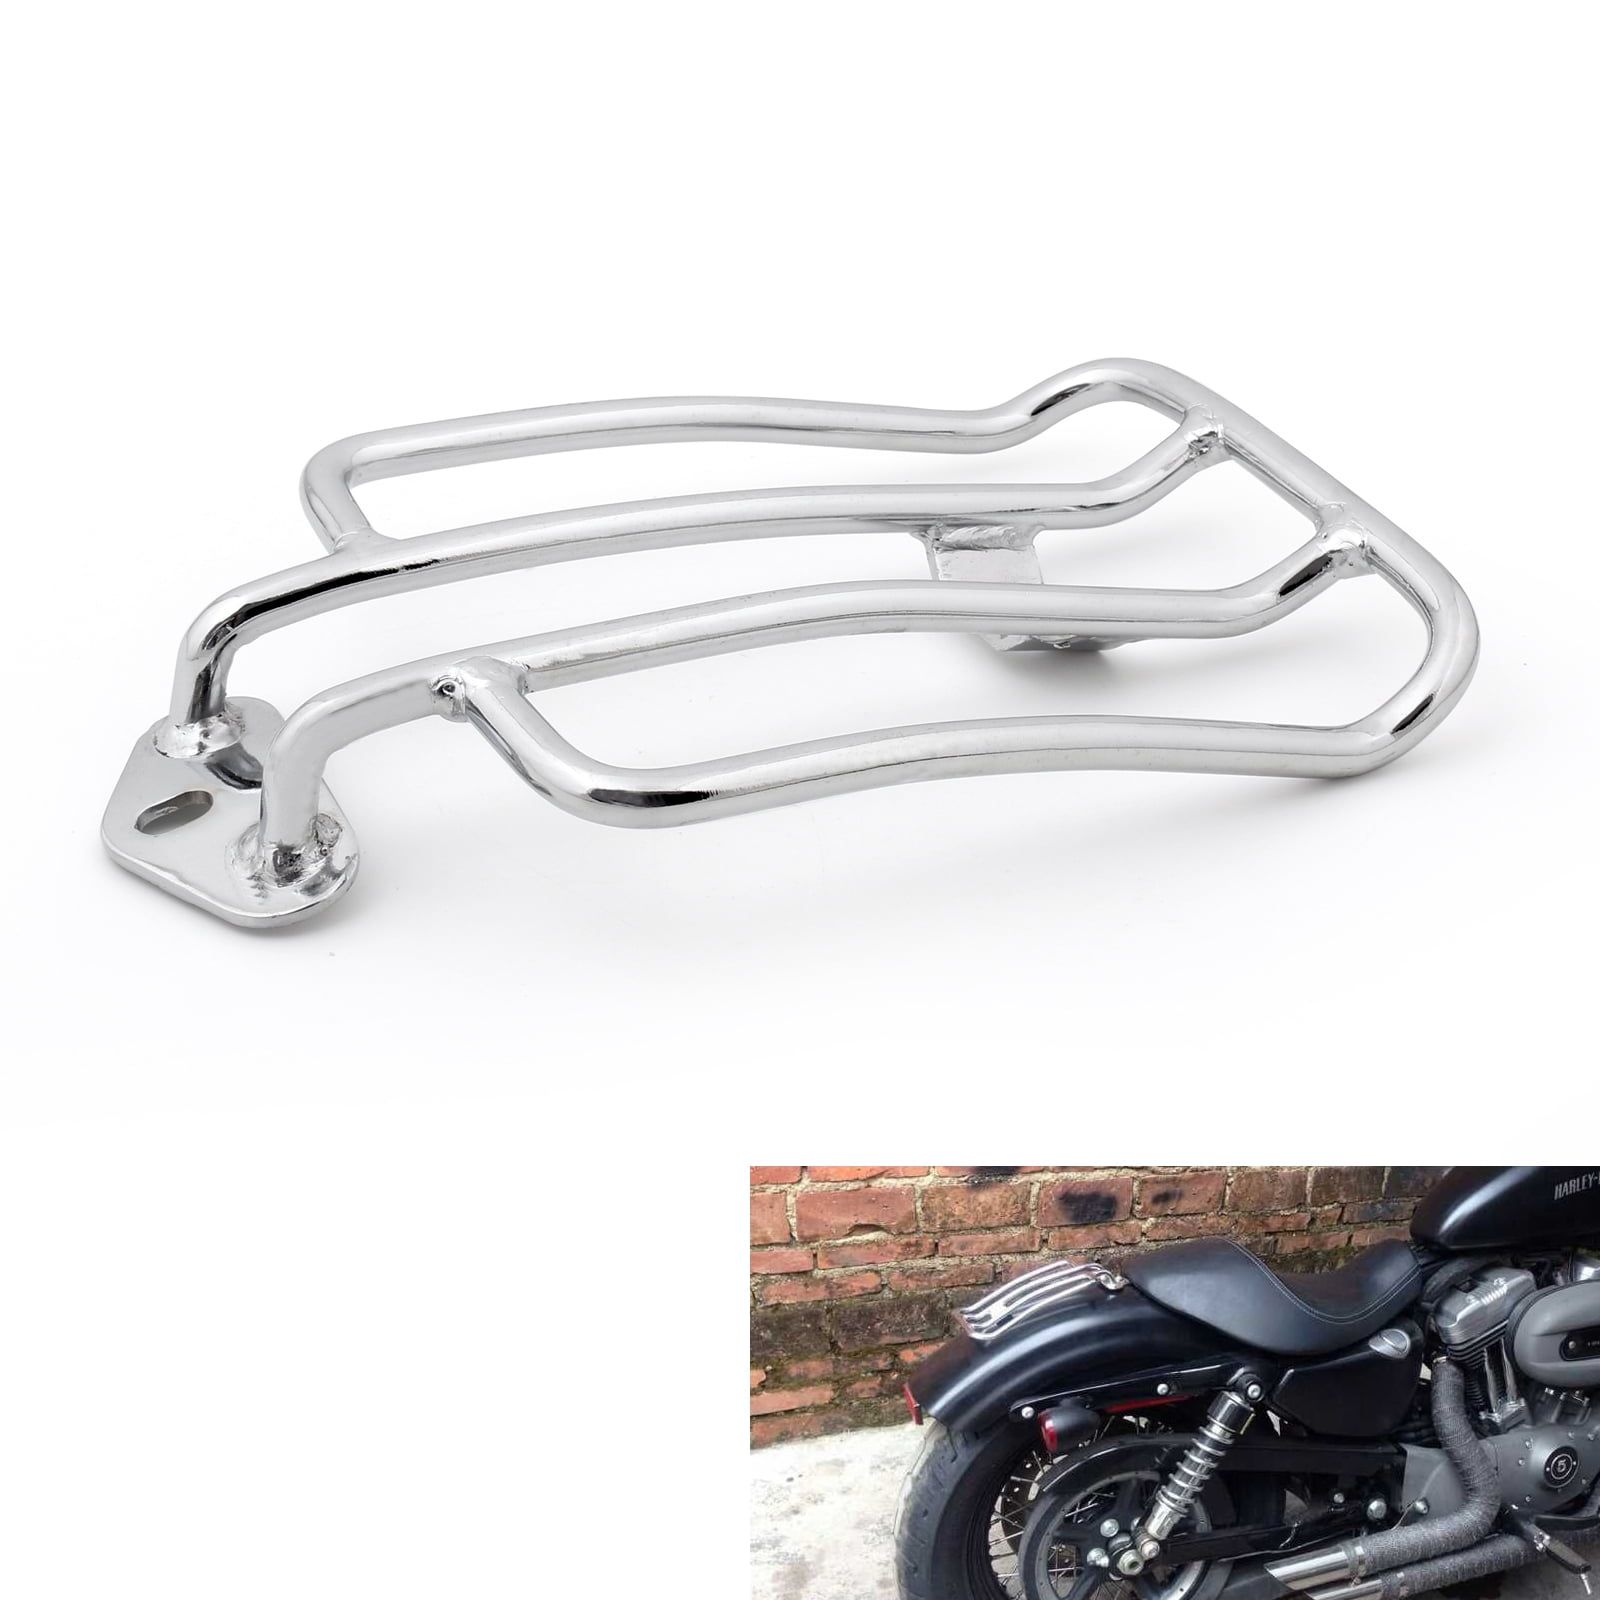 Motorcycle Rear Luggage Rack for Harley Davidson Sportster XL883 1200 Solo Seat 